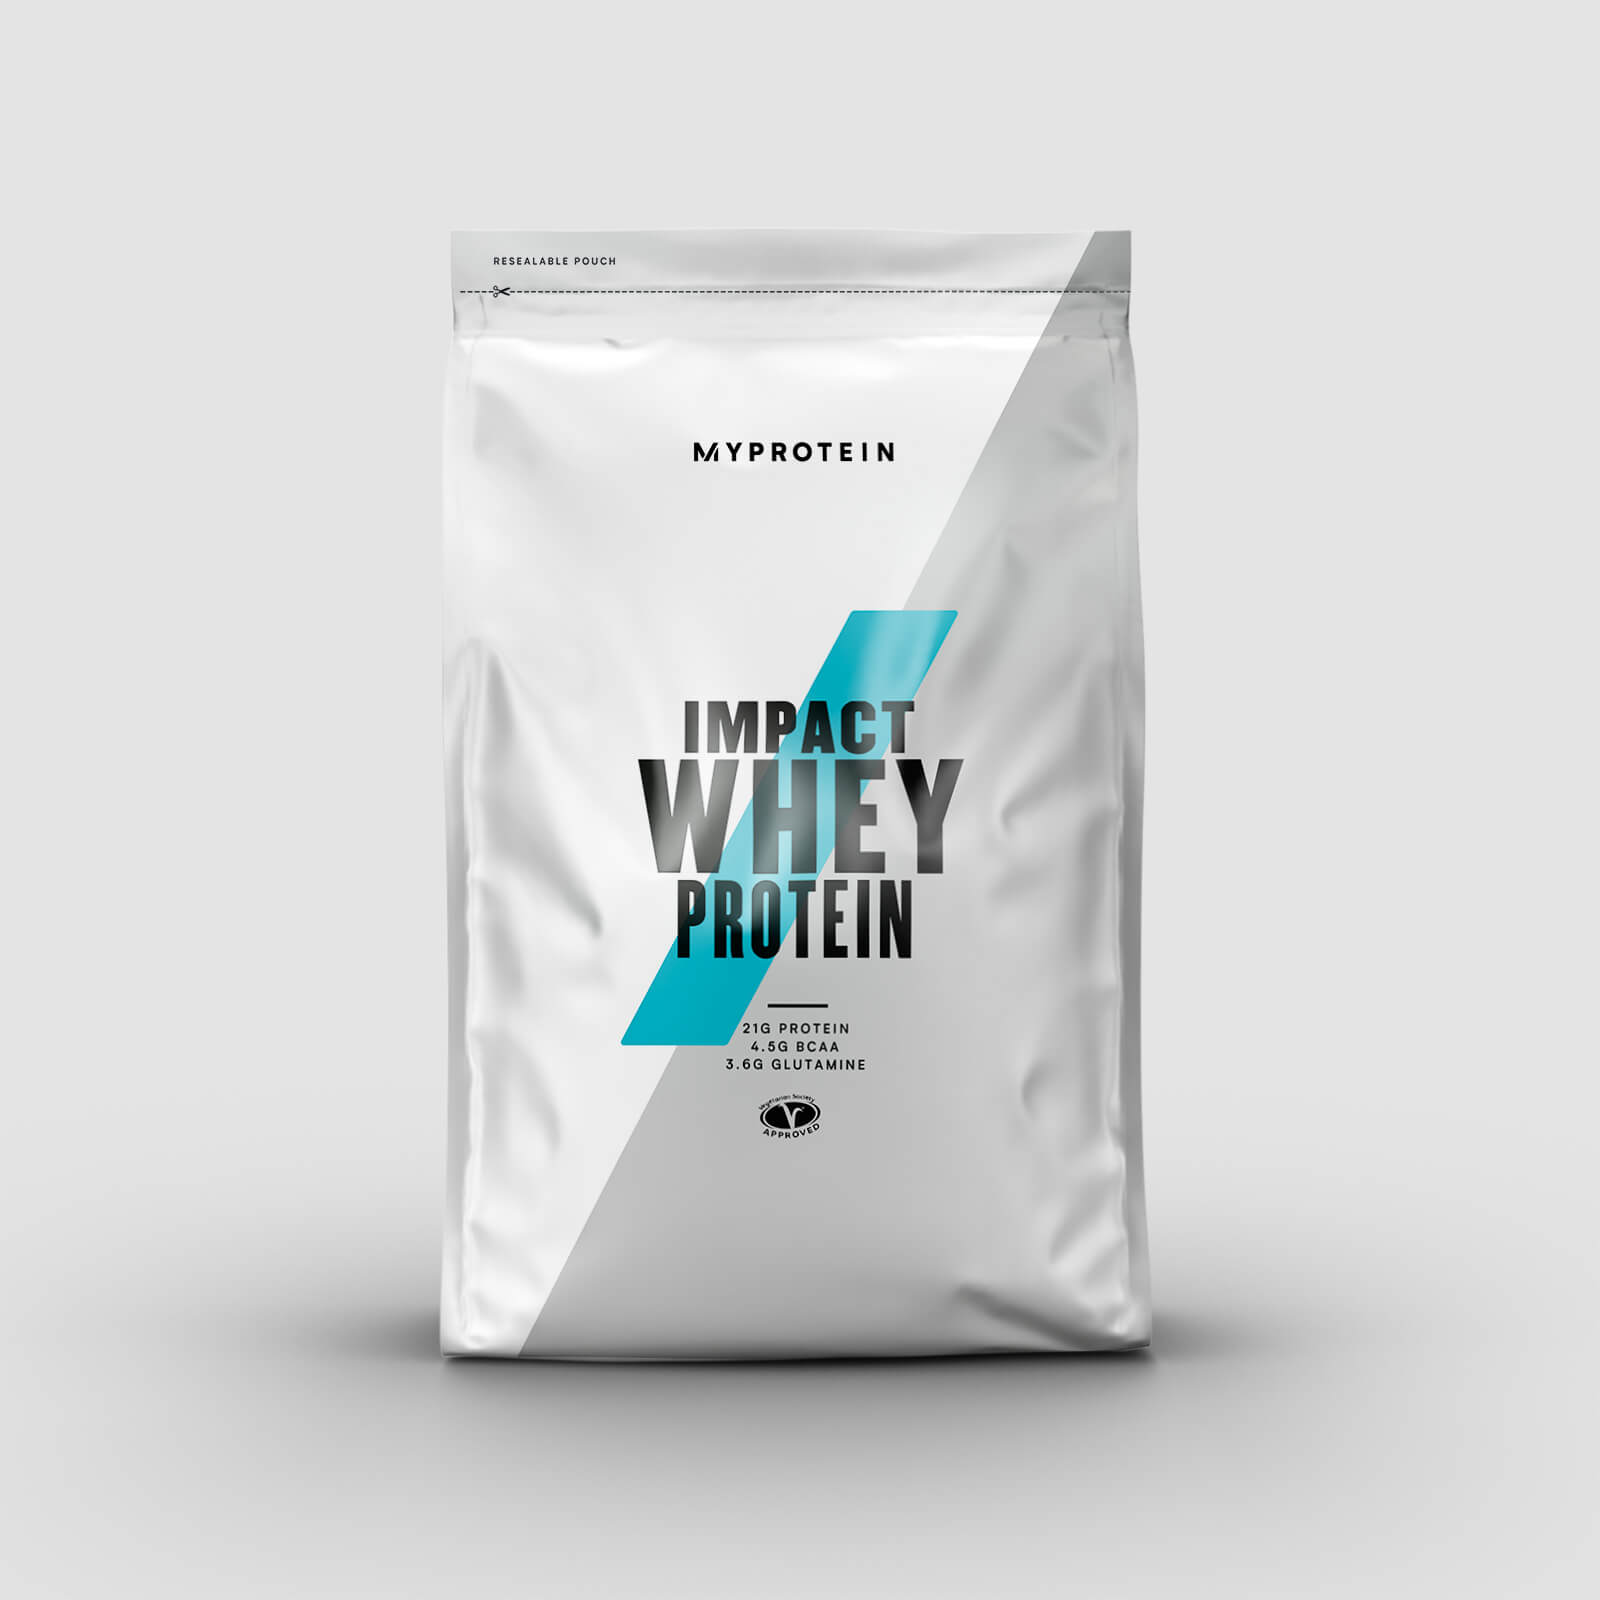 Myprotein Impact Whey Protein - 2.5kg - White Chocolate - New and Improved